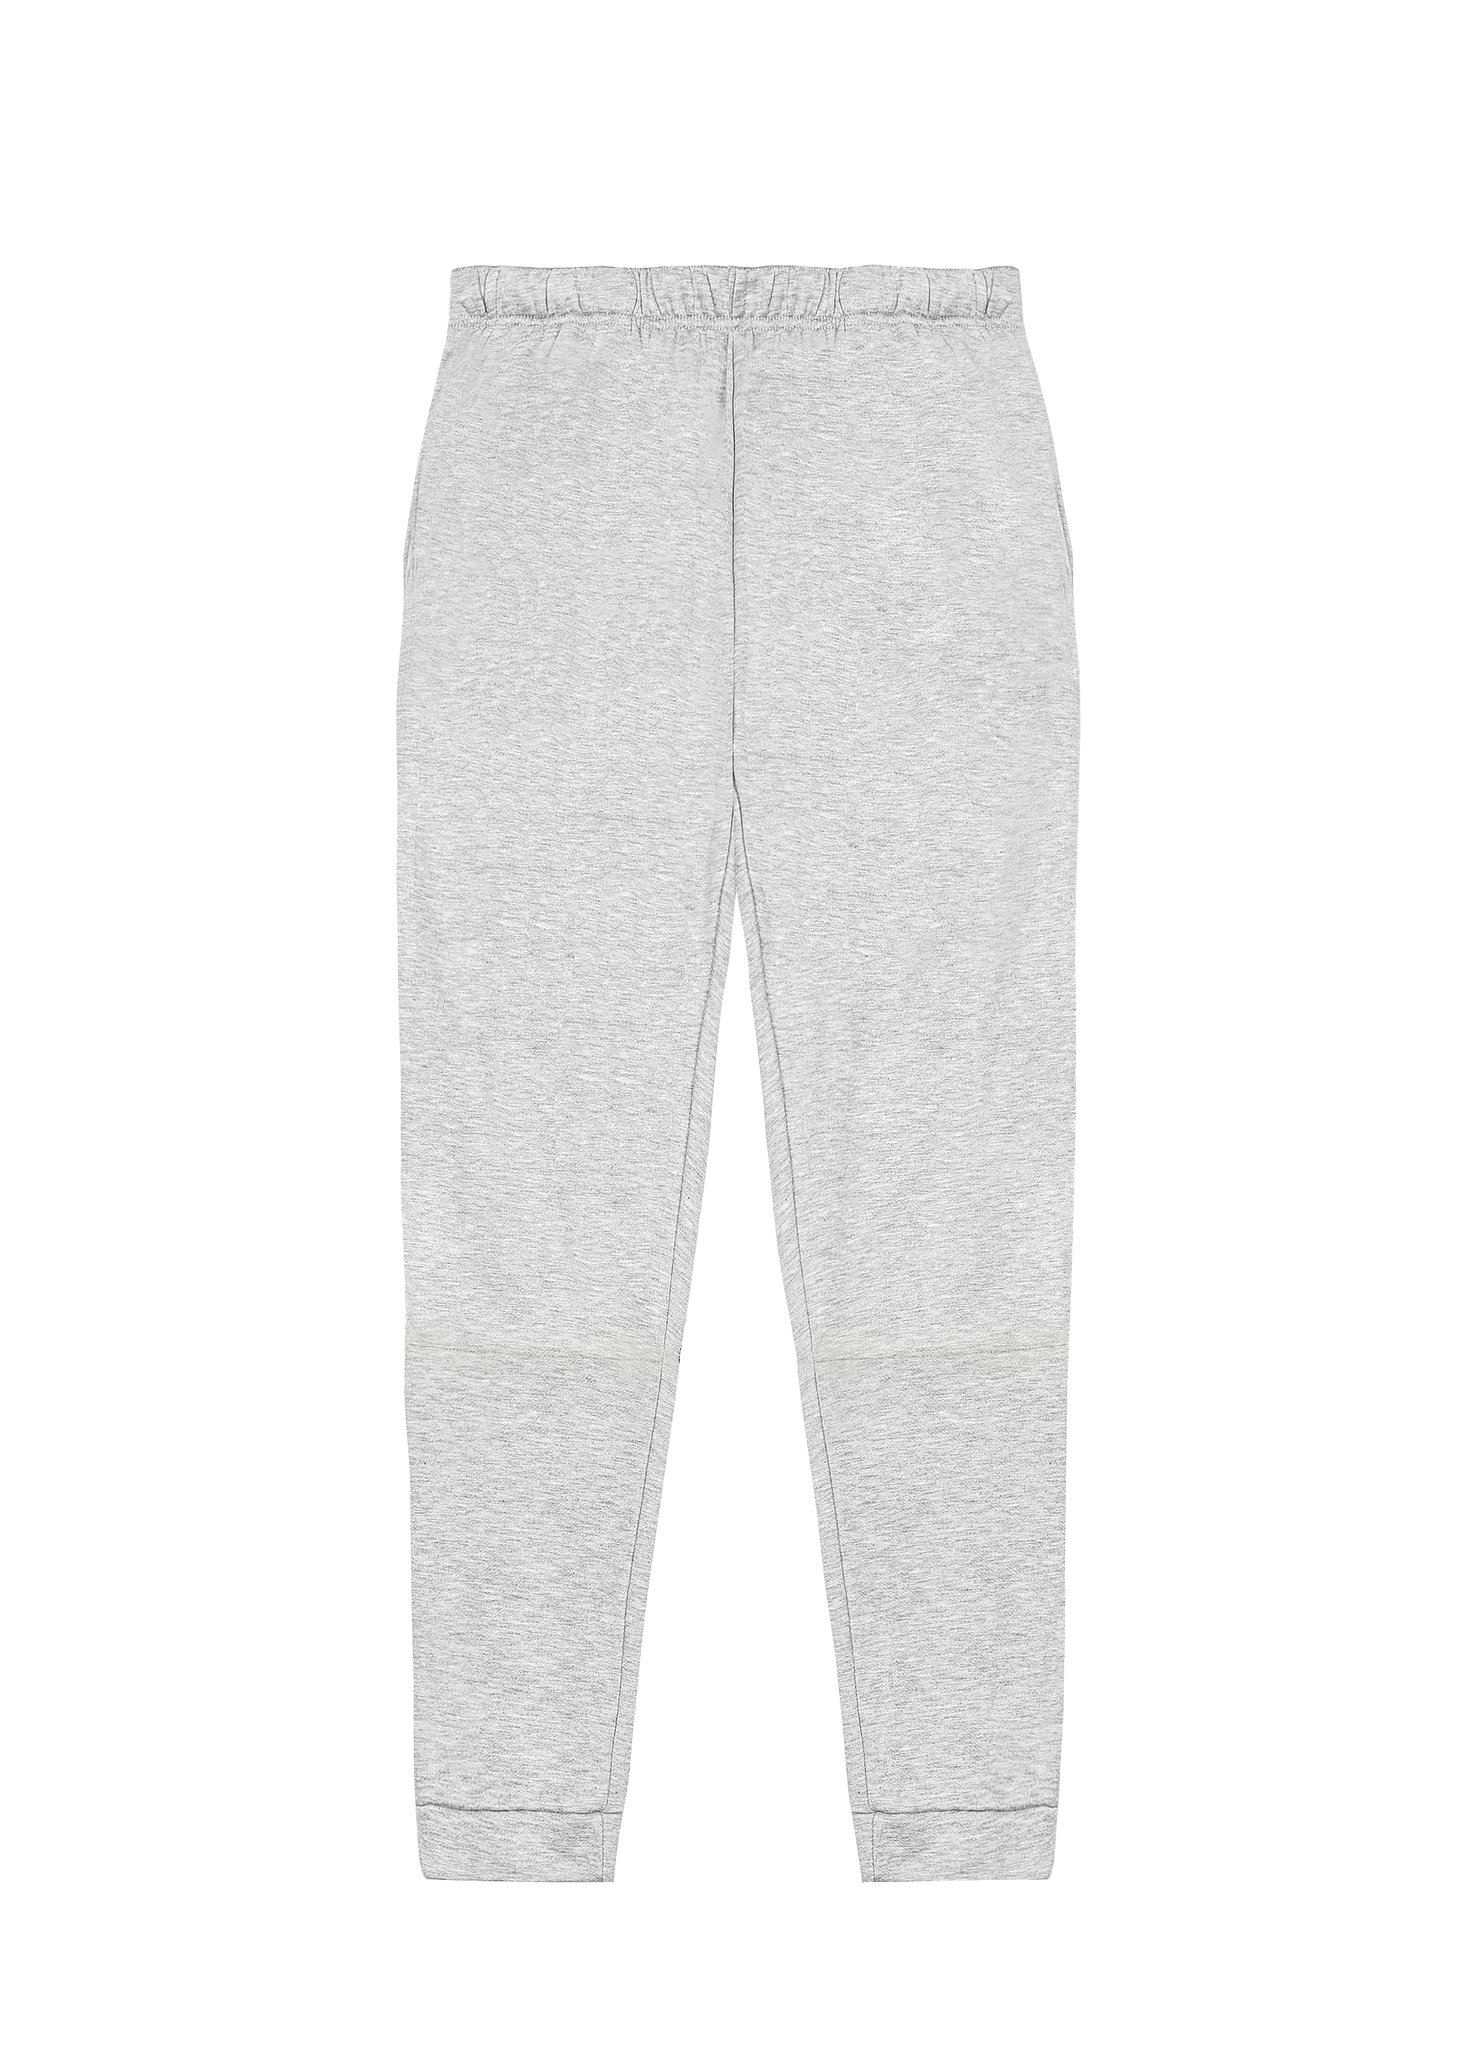 GG cotton terry cloth jogging pants in white